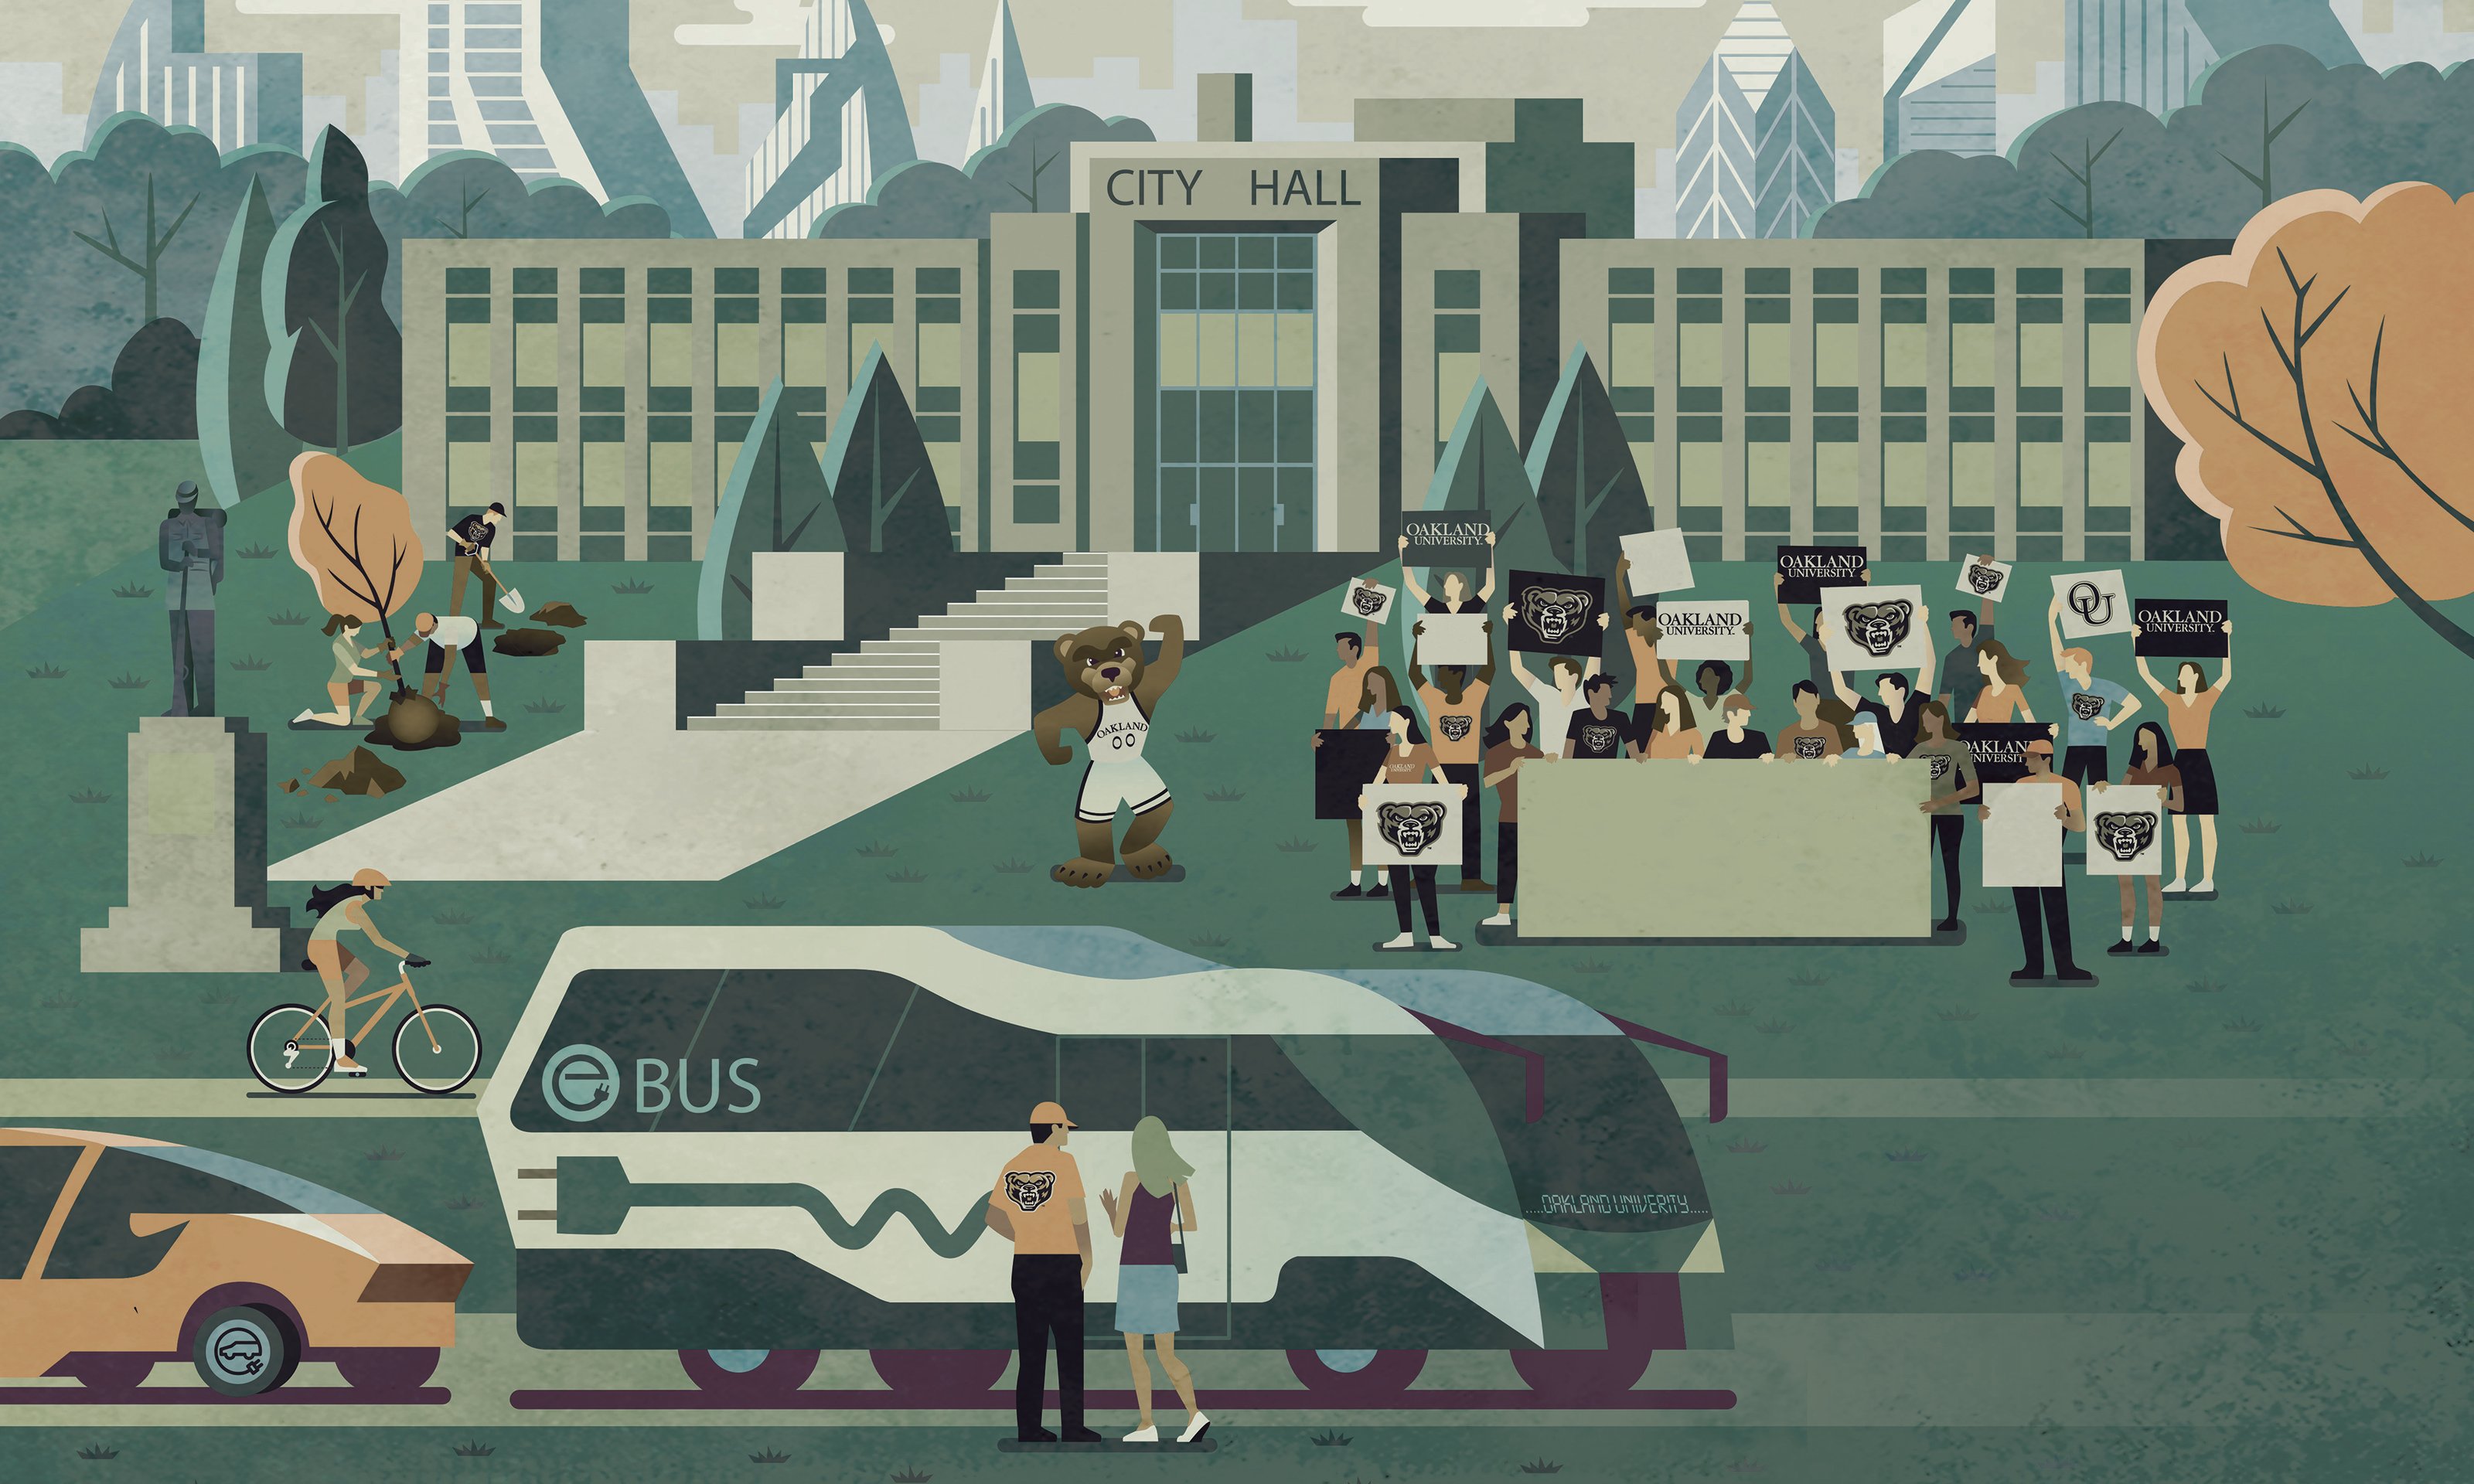 Illustration of Pontiac City Hall with OU students and grizz bear cheering outside. People planting trees to the right and bus and cyclist in the foreground.